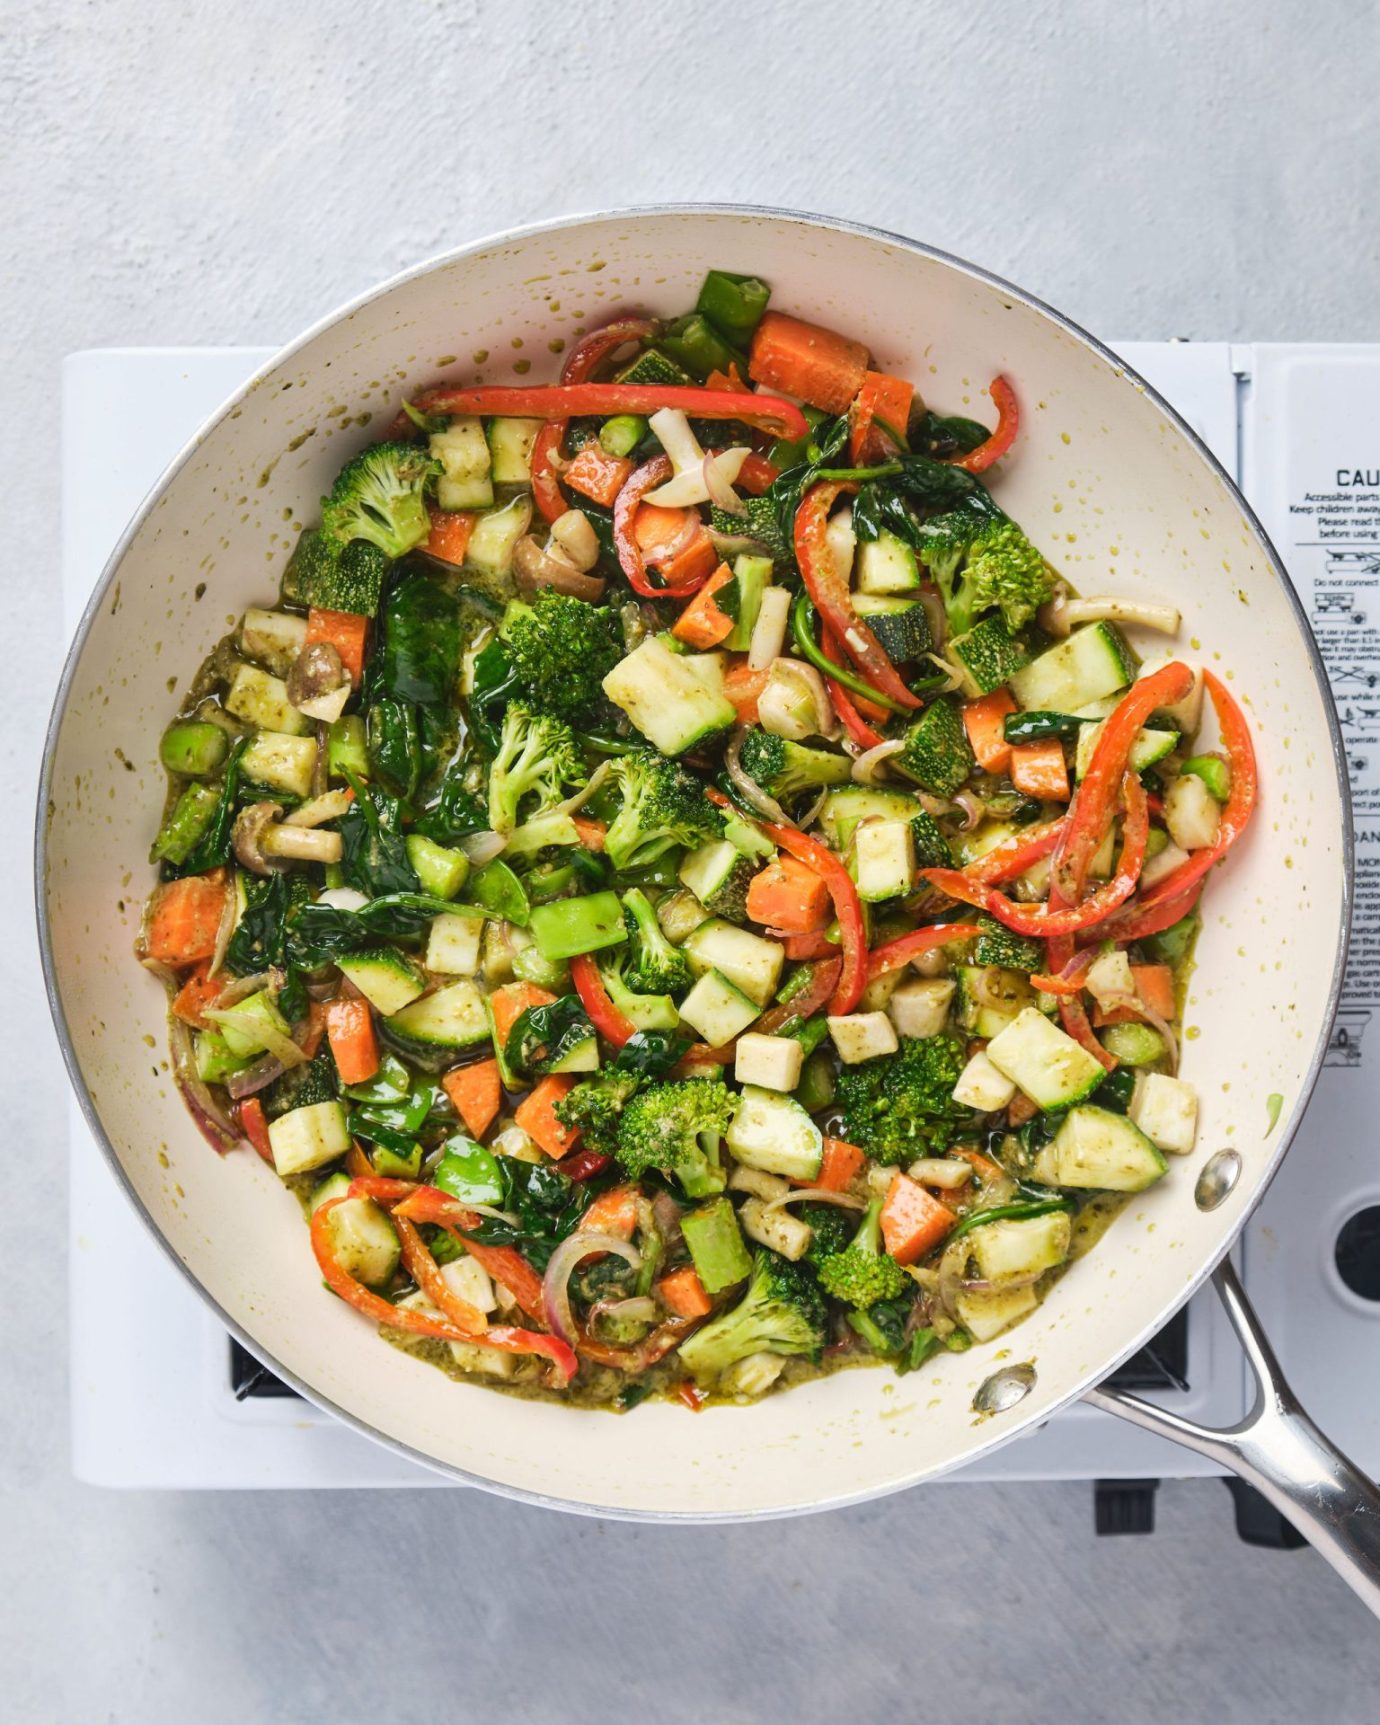 photo of sauteed vegetables in a white frying pan